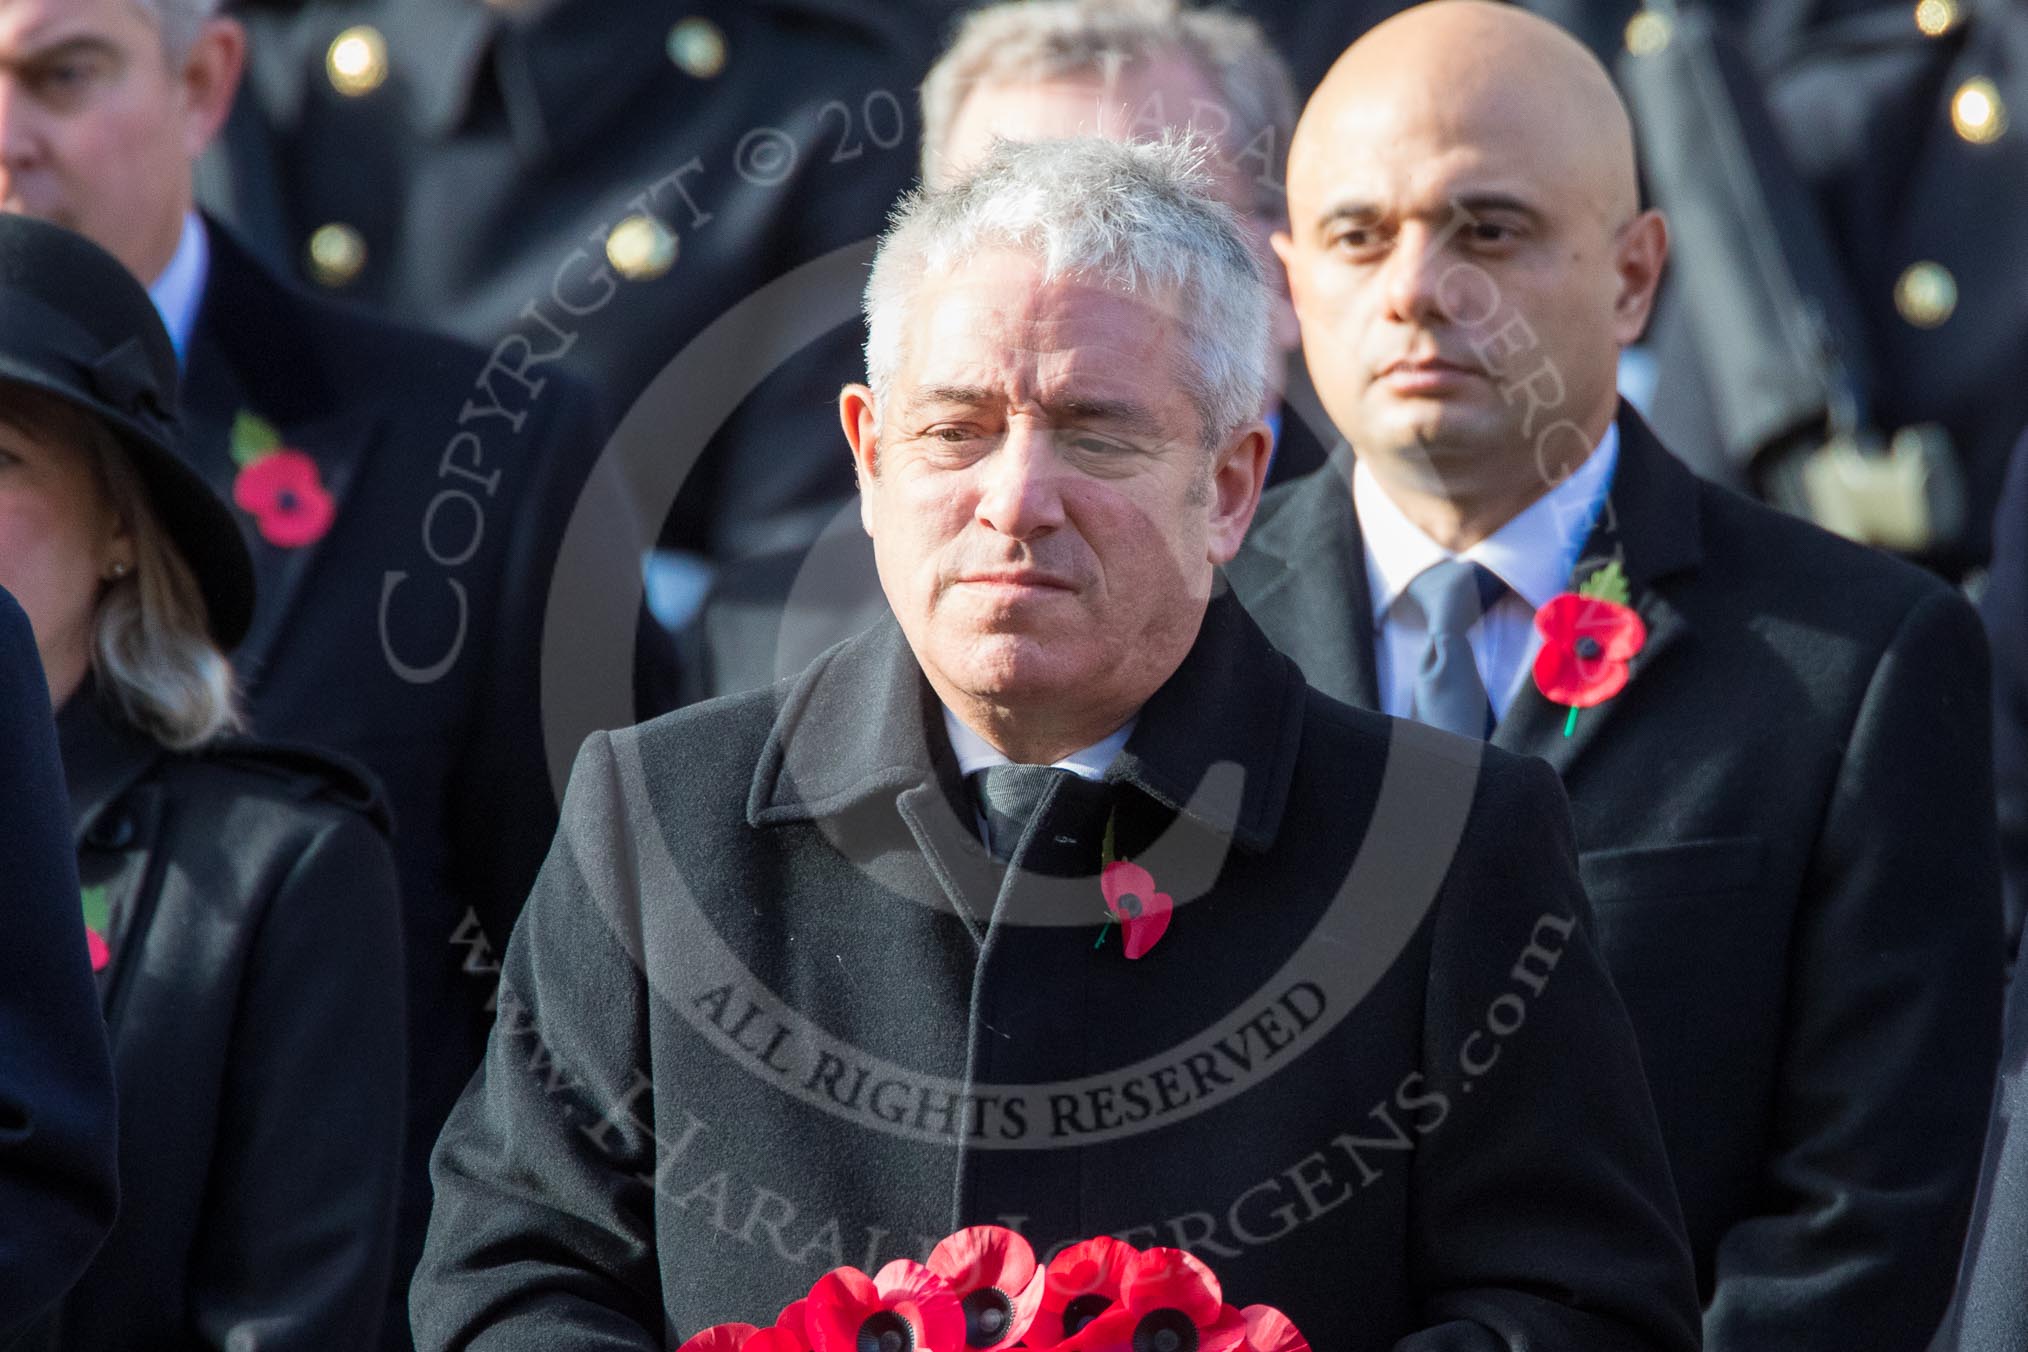 The Rt Hon John Bercow MP, Speaker of the House of Commons (on behalf of Parliament representing members of the House of Commons) with his wreath during the Remembrance Sunday Cenotaph Ceremony 2018 at Horse Guards Parade, Westminster, London, 11 November 2018, 10:57.